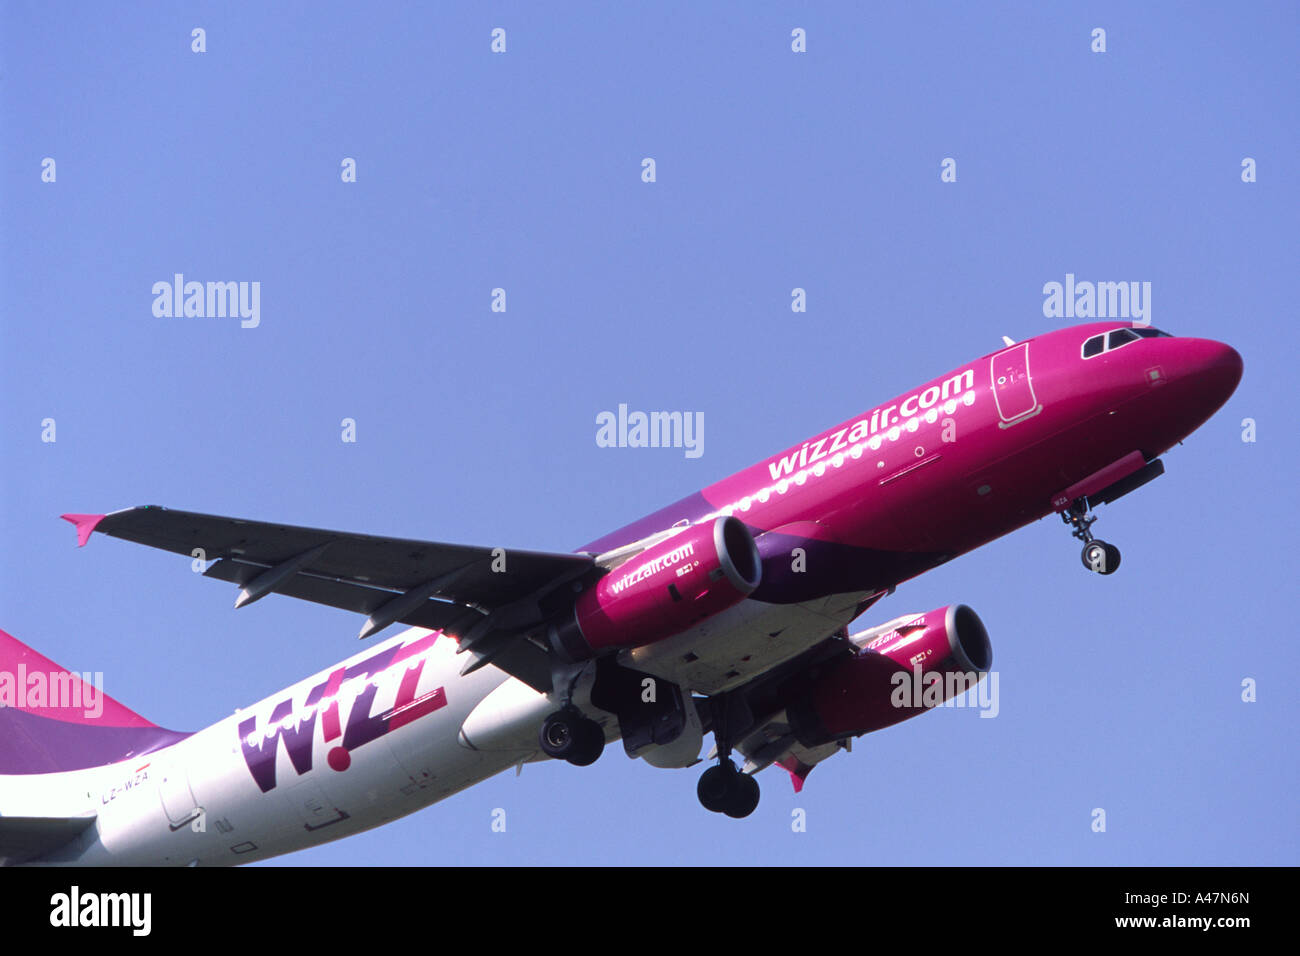 Wozz Air Airbus A320 climbing out from Luton Aiport, UK Stock Photo